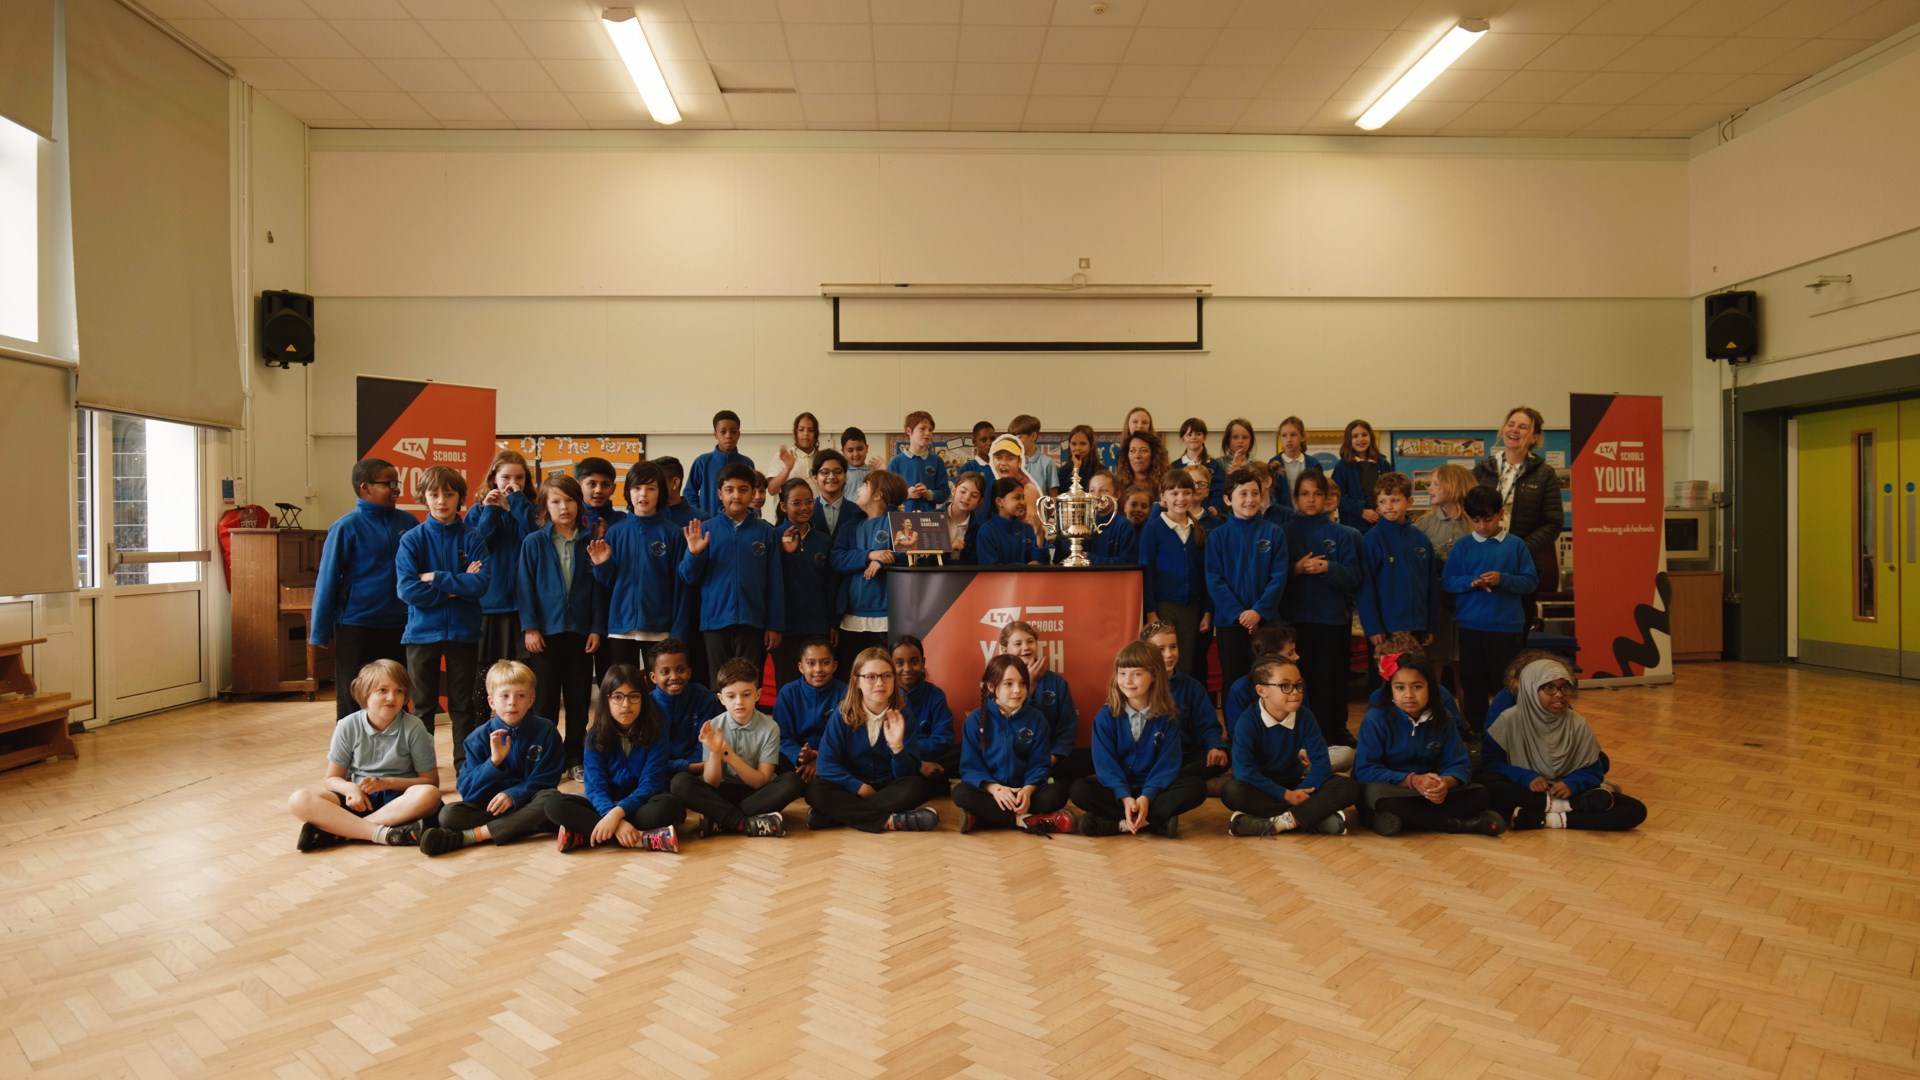 Class of Glenfrome Primary School pictured with the US Open Trophy